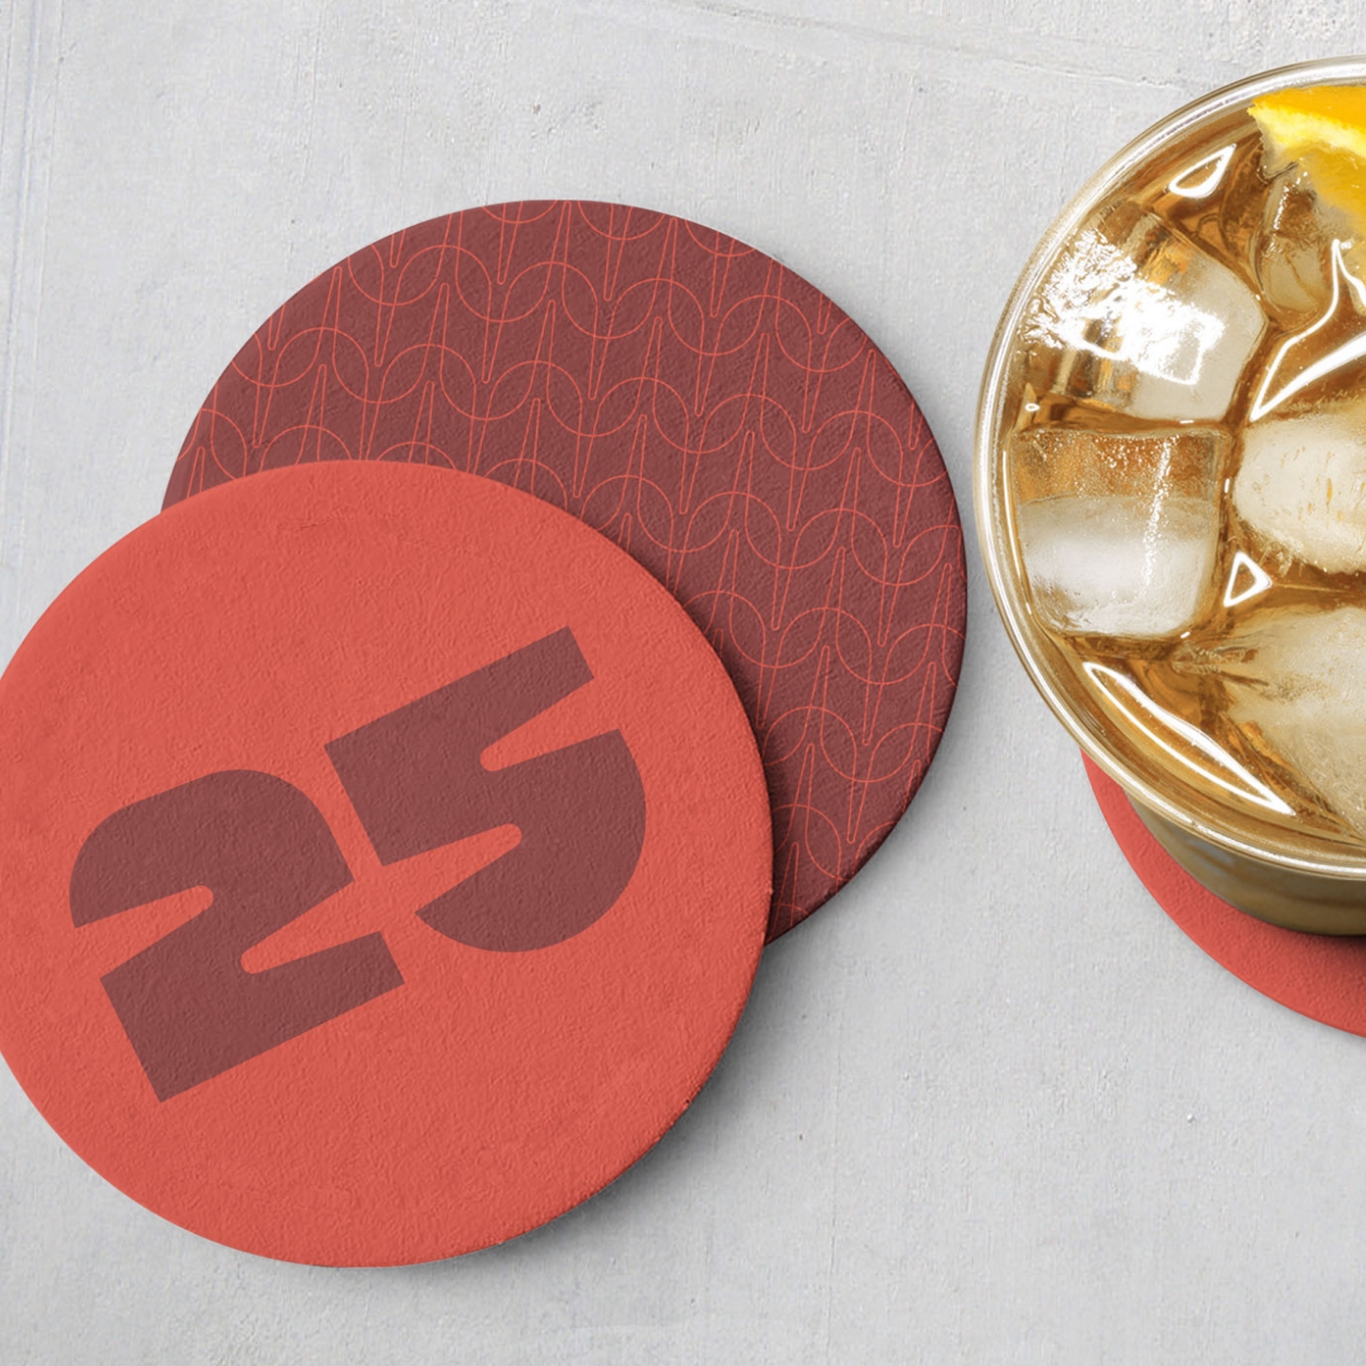 Paper coasters branded with 25th anniversary logo